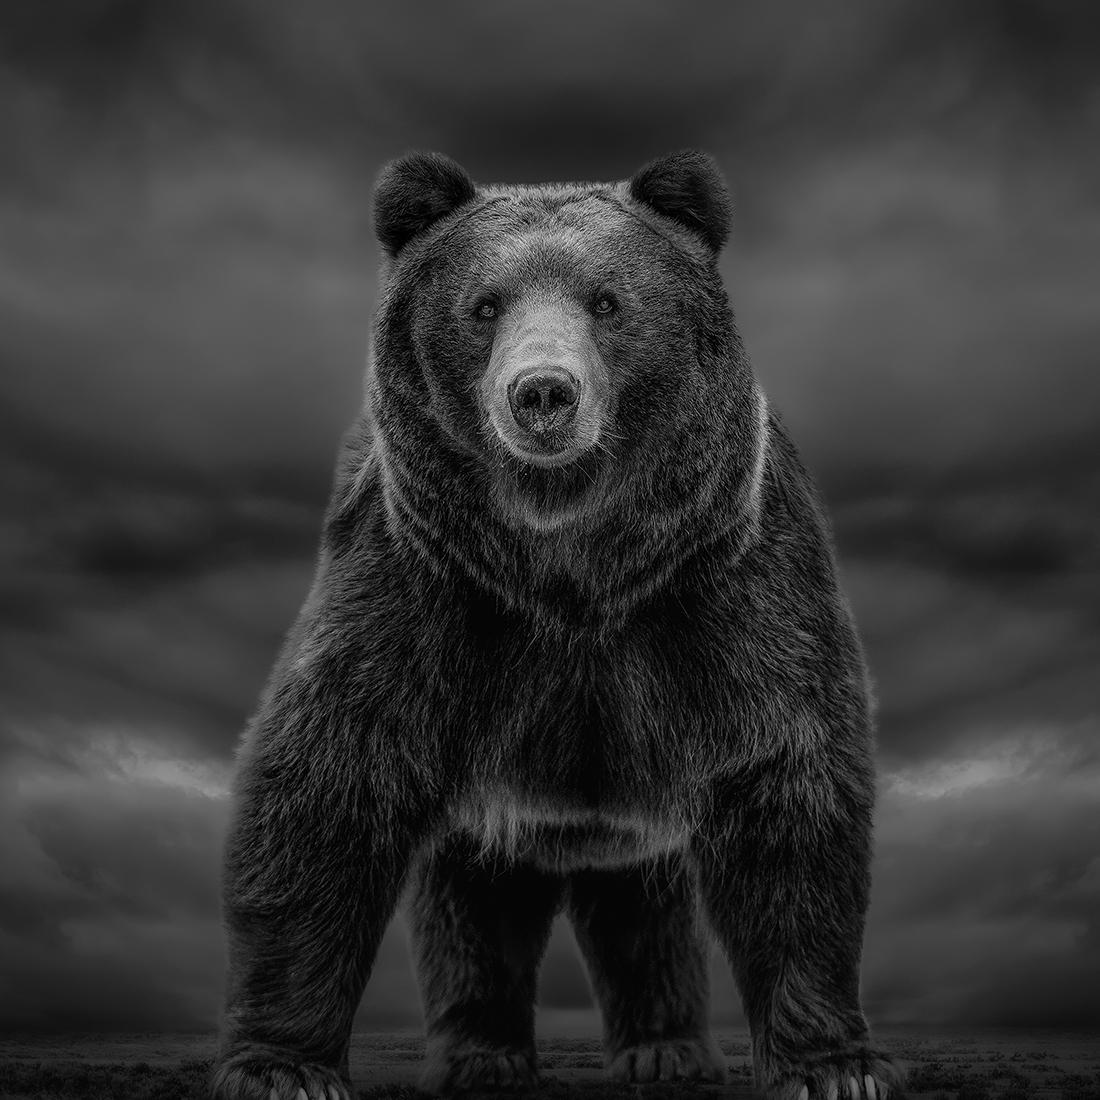 Shane Russeck Animal Print - "Times Like These"  40x40  Black & White Photography, Grizzly Bear Photograph